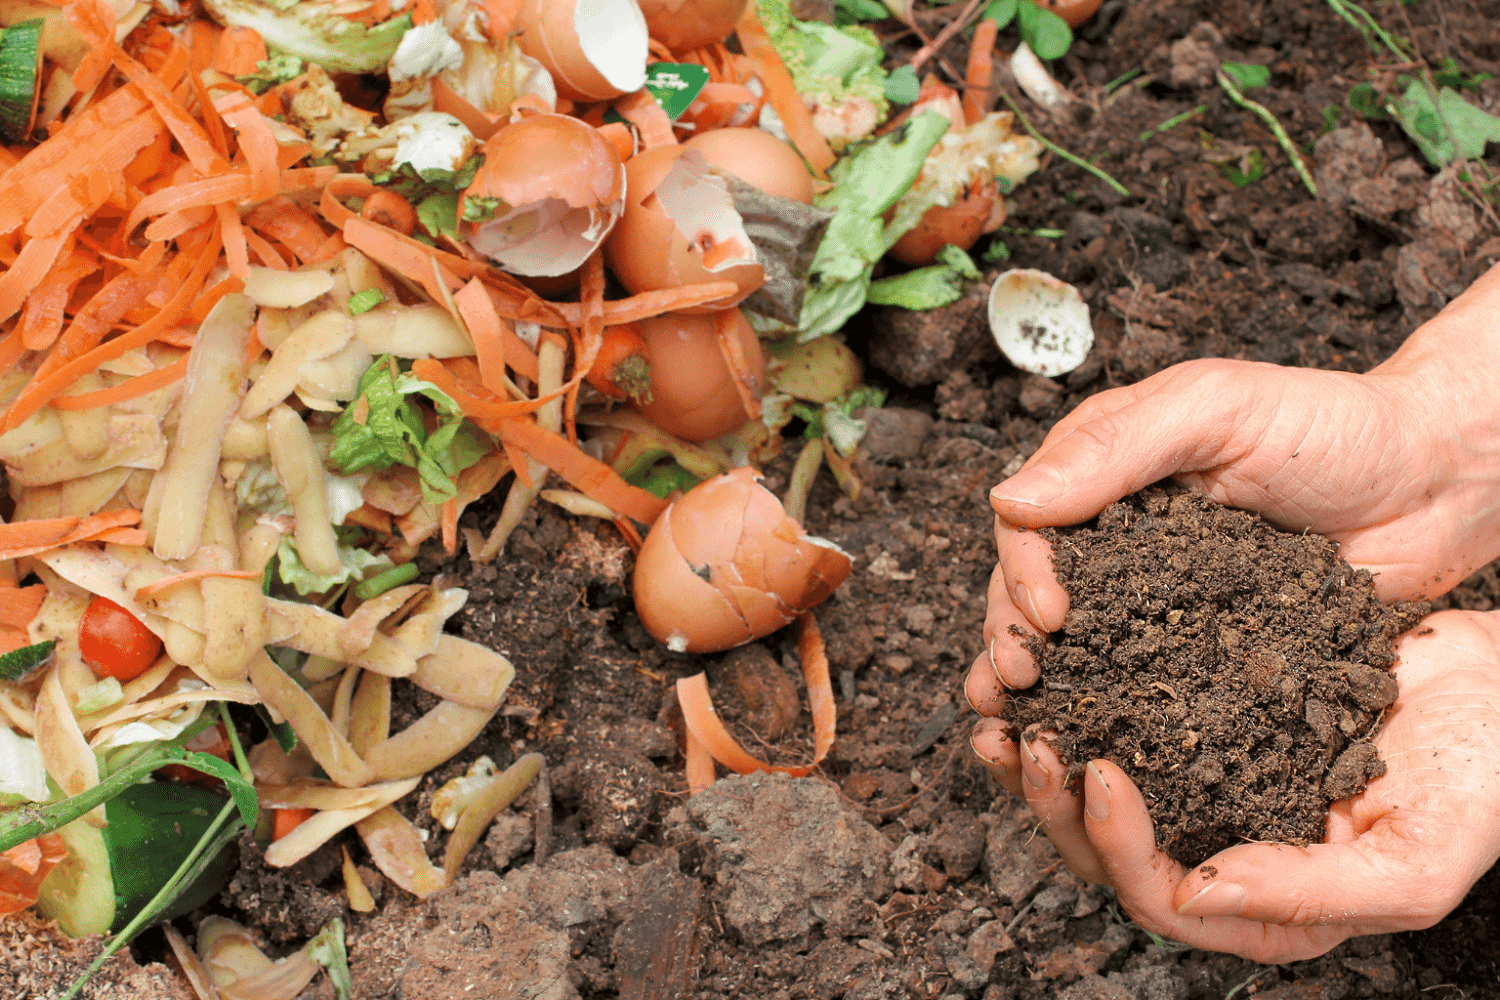 What does compostability mean?